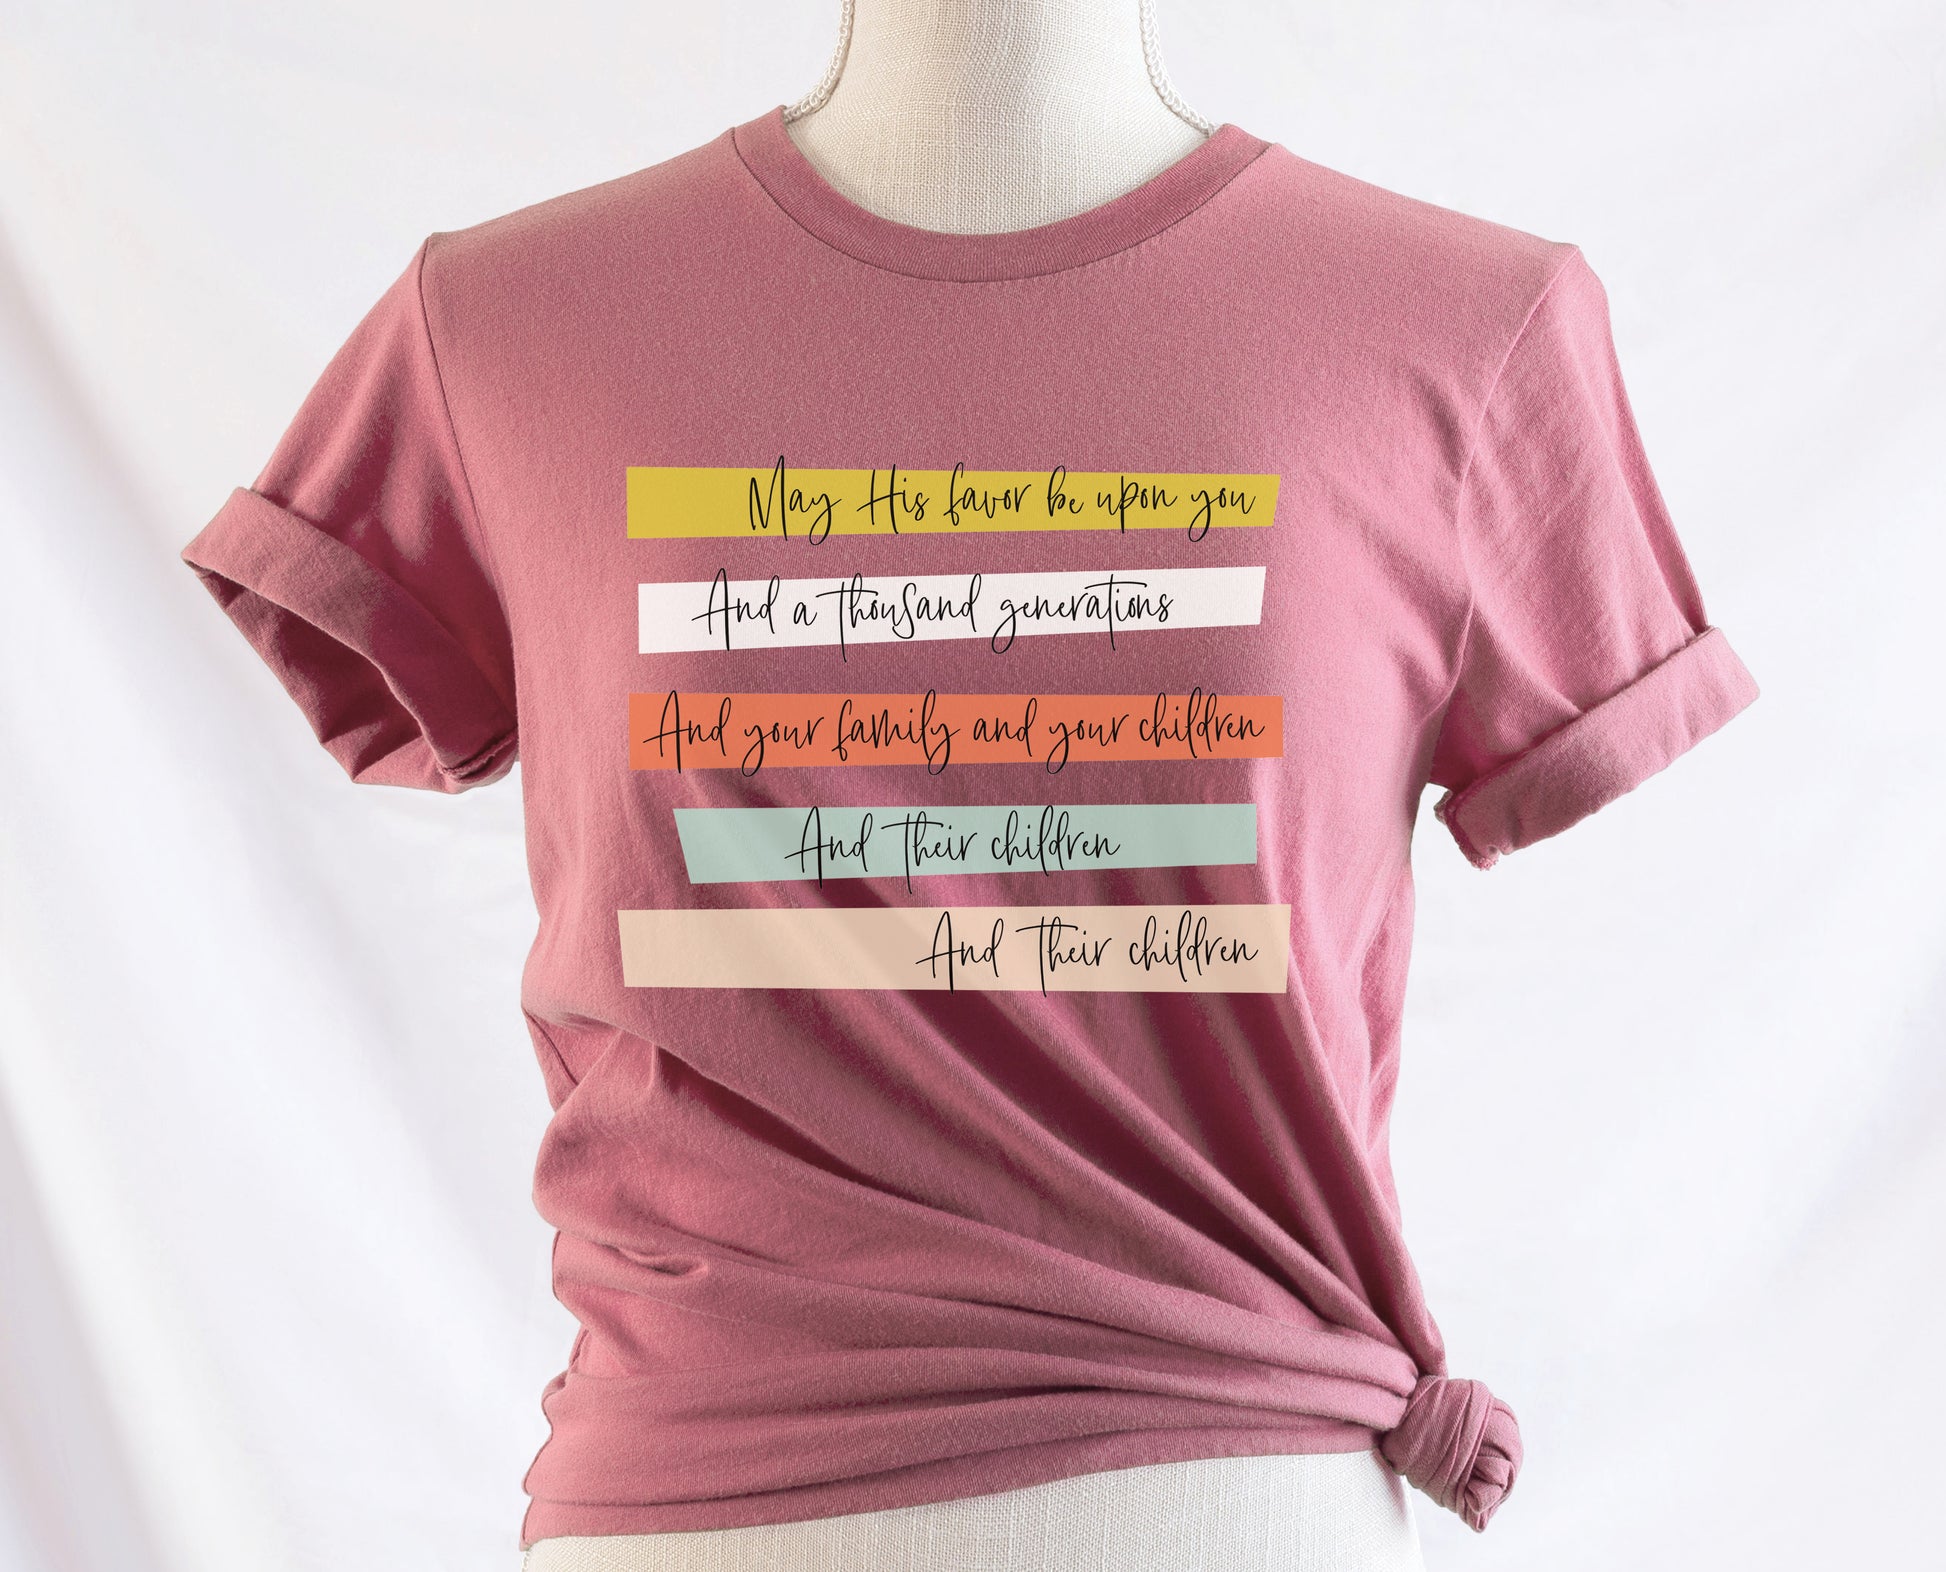 May His Favor Be Upon You and a thousand generations The Family and children Blessing Christian aesthetic 5 bars design printed on soft mauve t-shirt for women